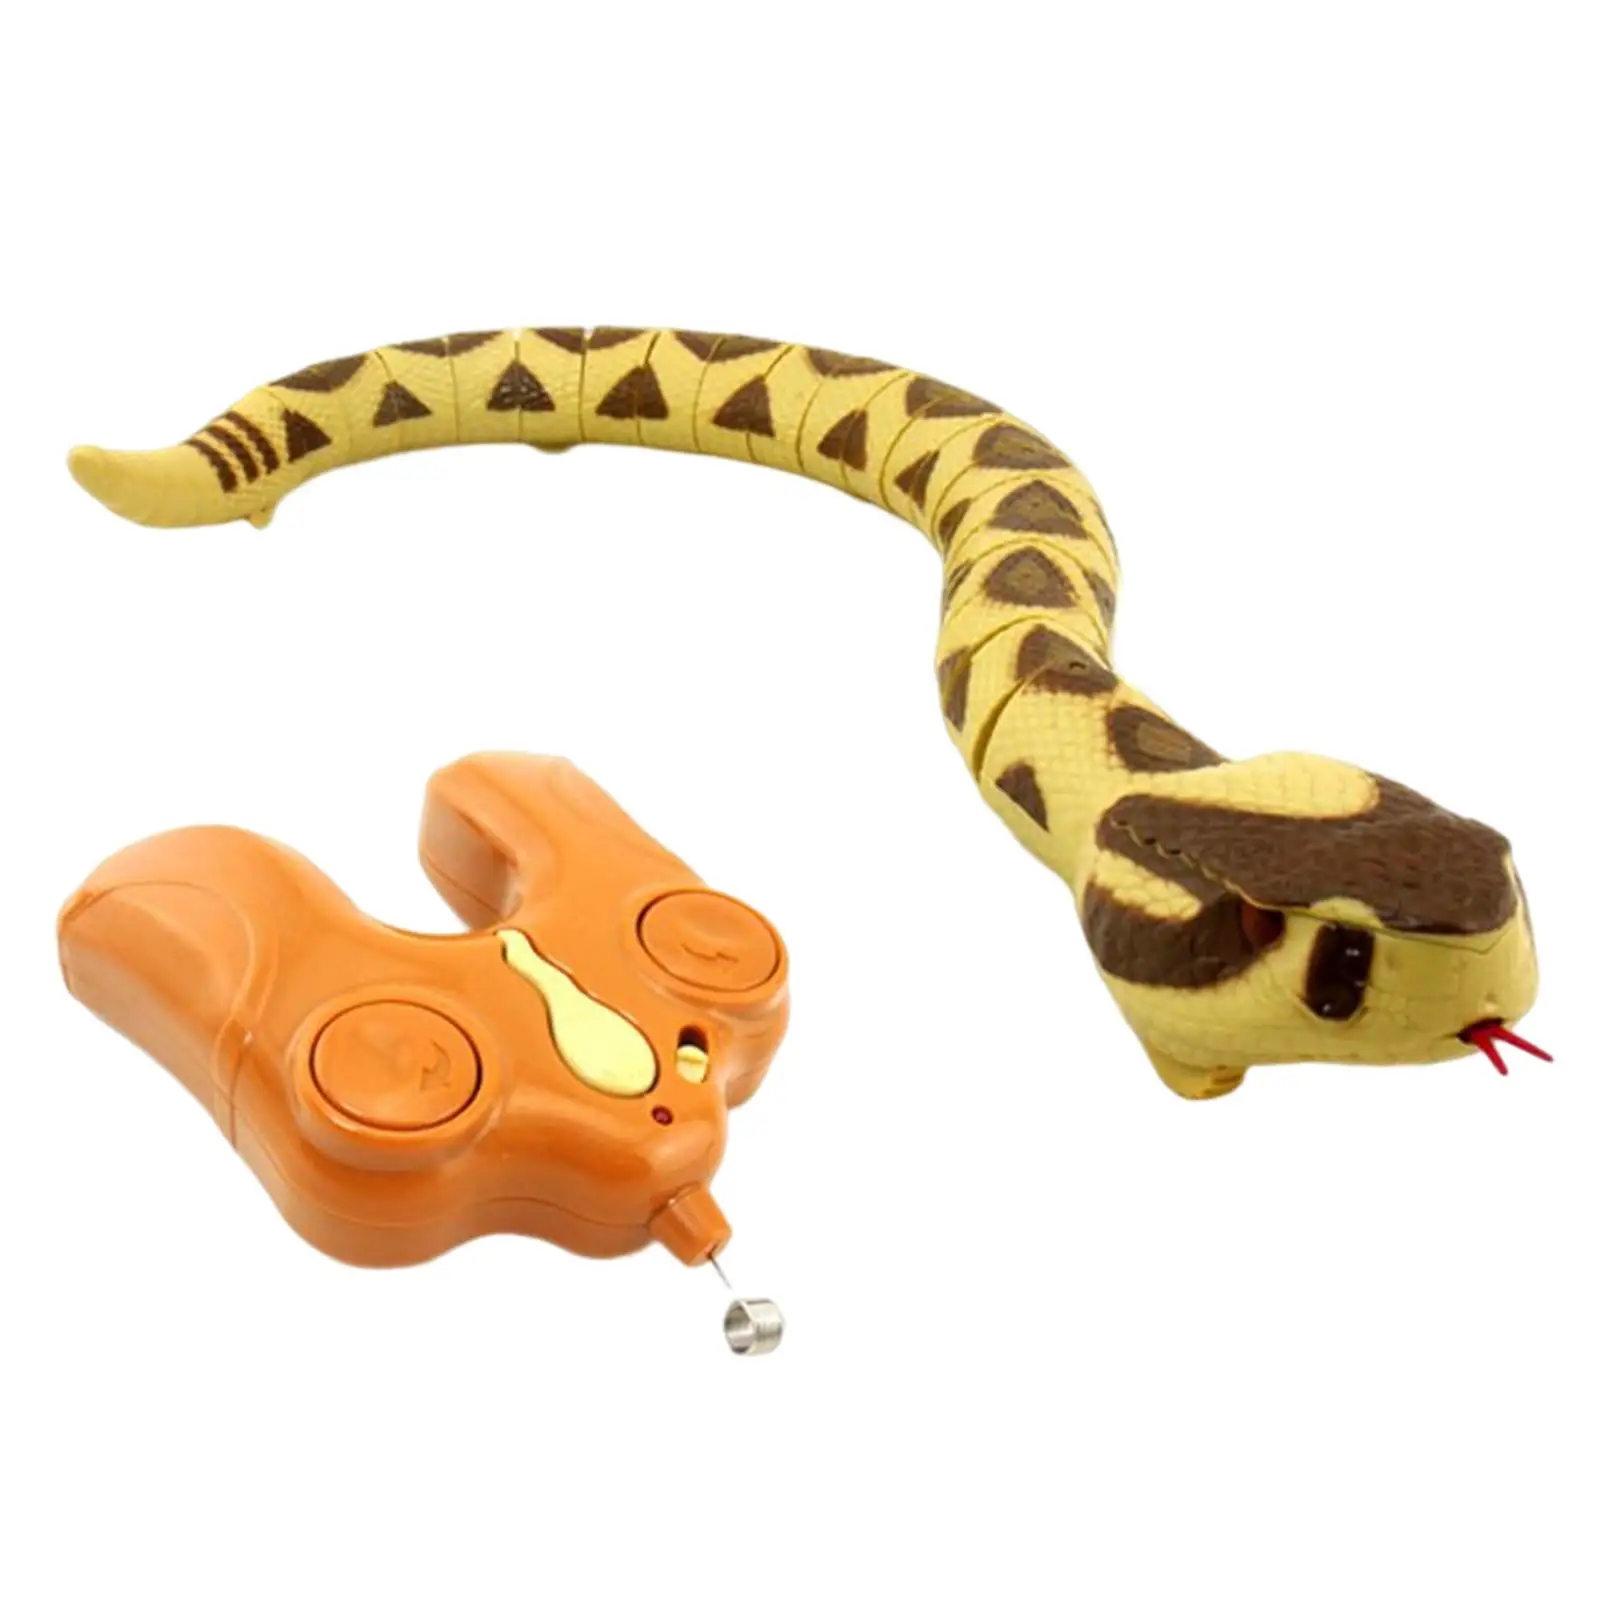 Lifelike RC Snake Toys Scary Snake Toy Halloween Tricks Toy for Party Tricks